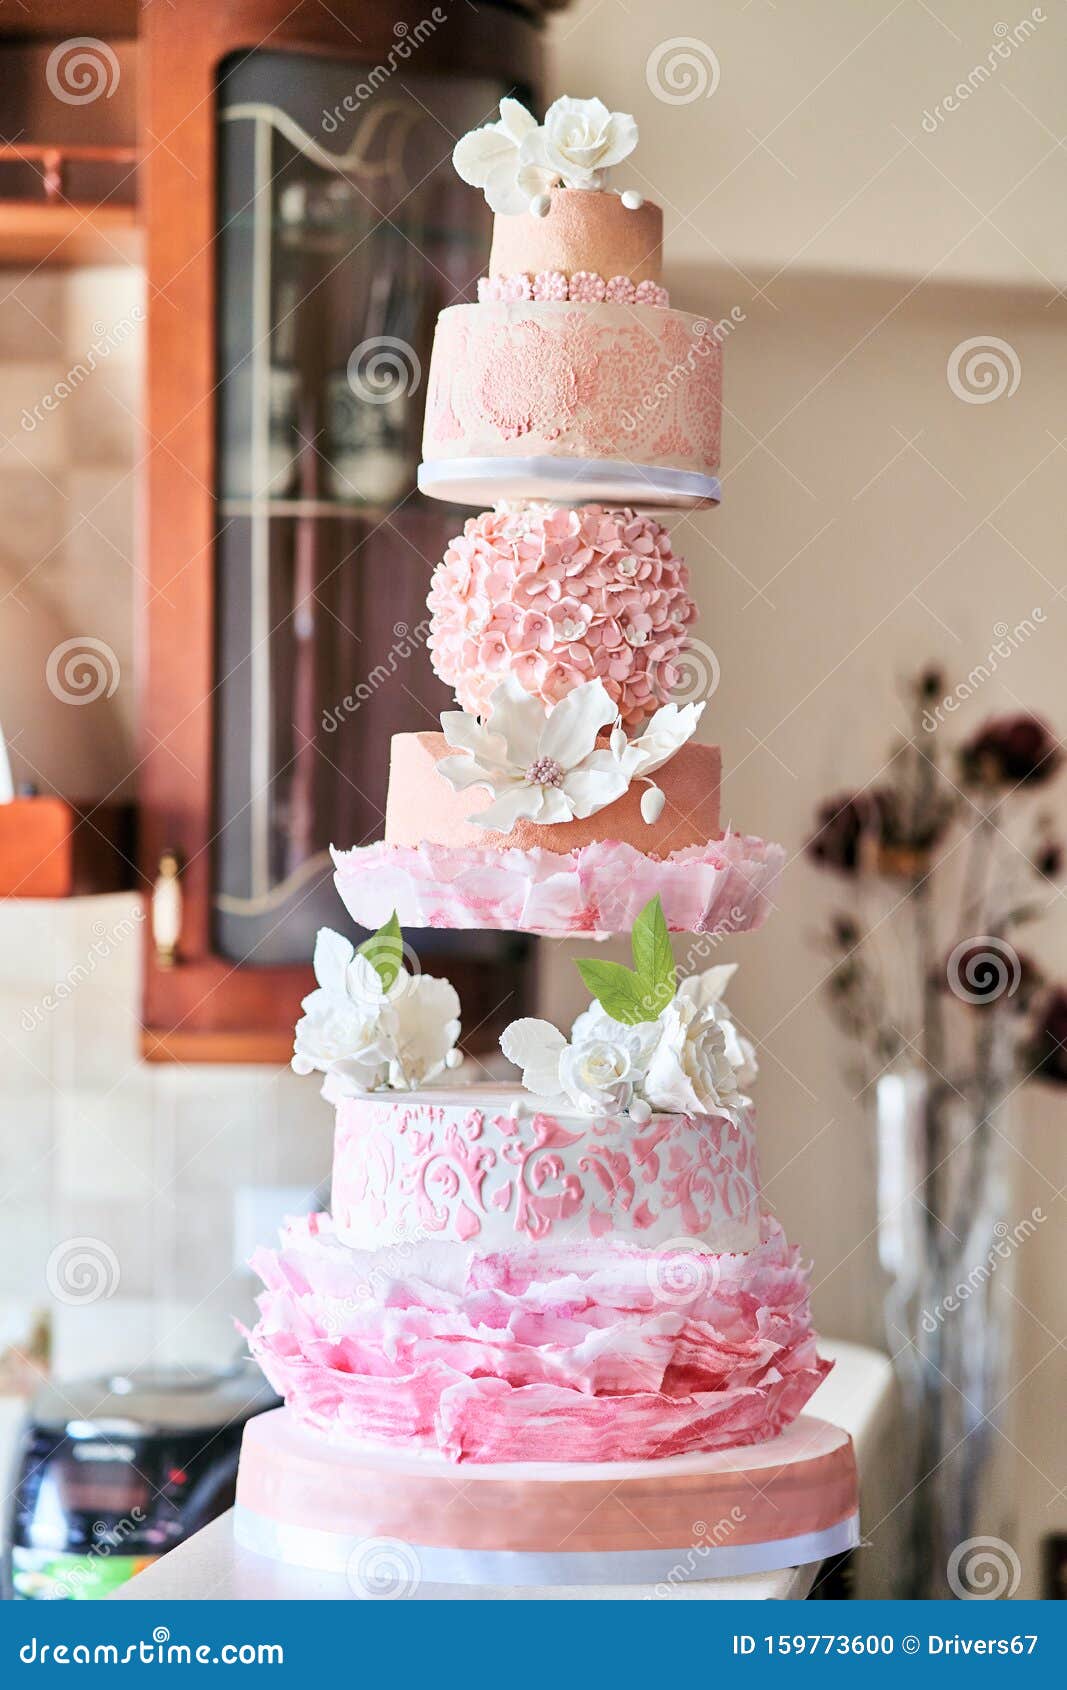 Big Layered Cake Show. Pink Cake with White Roses Stock Photo ...